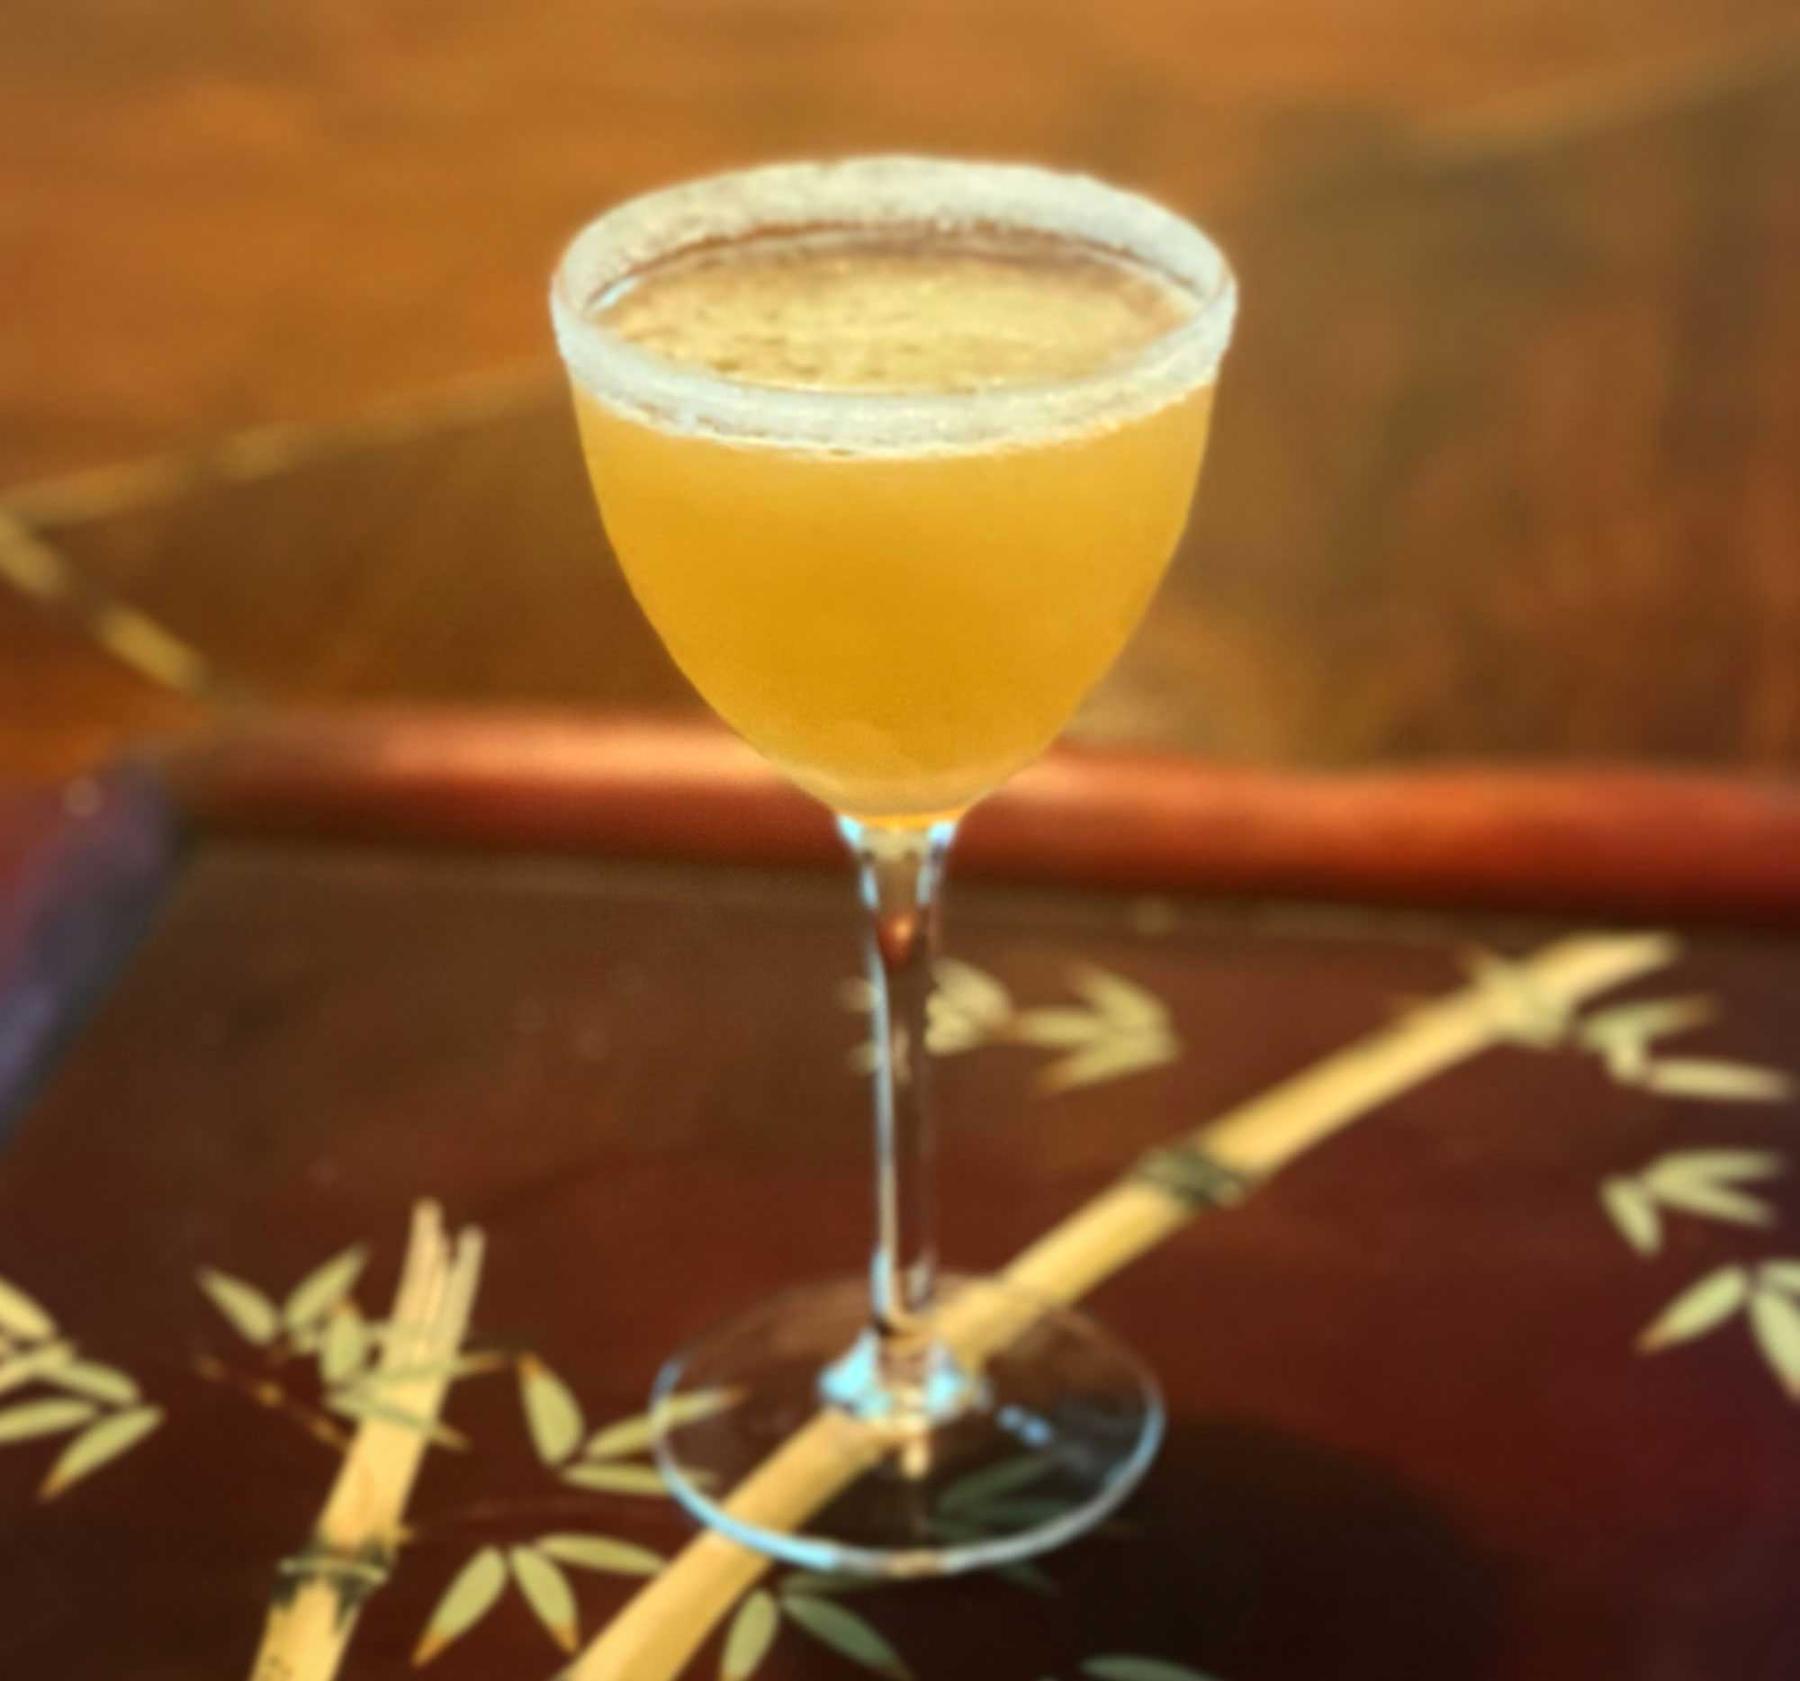 An example of the Almond Blossom Crusta, the mixed drink (drink), by Charles Baker, 1951, featuring cognac, Hayman’s London Dry Gin, lime juice, orgeat, and sugar; photo by Thierry Morpurgo